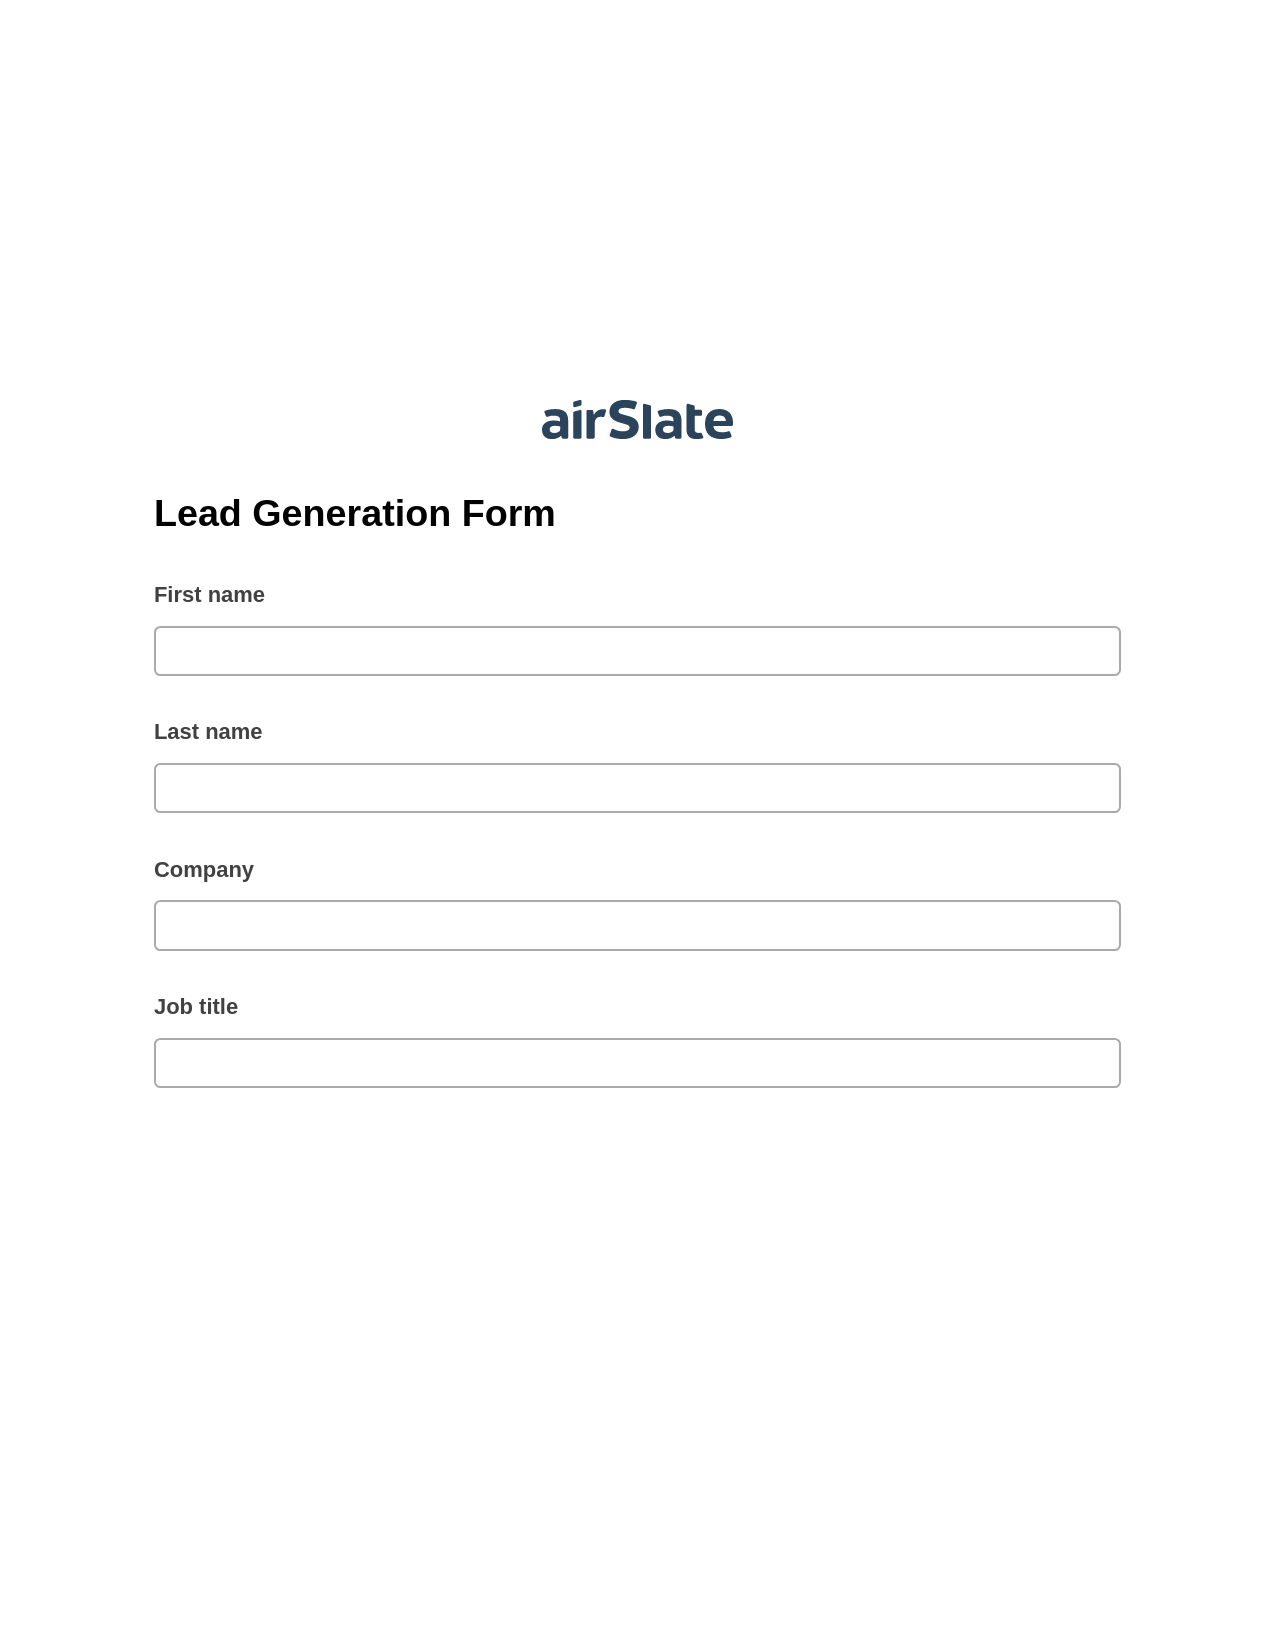 Lead Generation Form Pre-fill from CSV File Bot, Add Tags to Slate Bot, Archive to OneDrive Bot